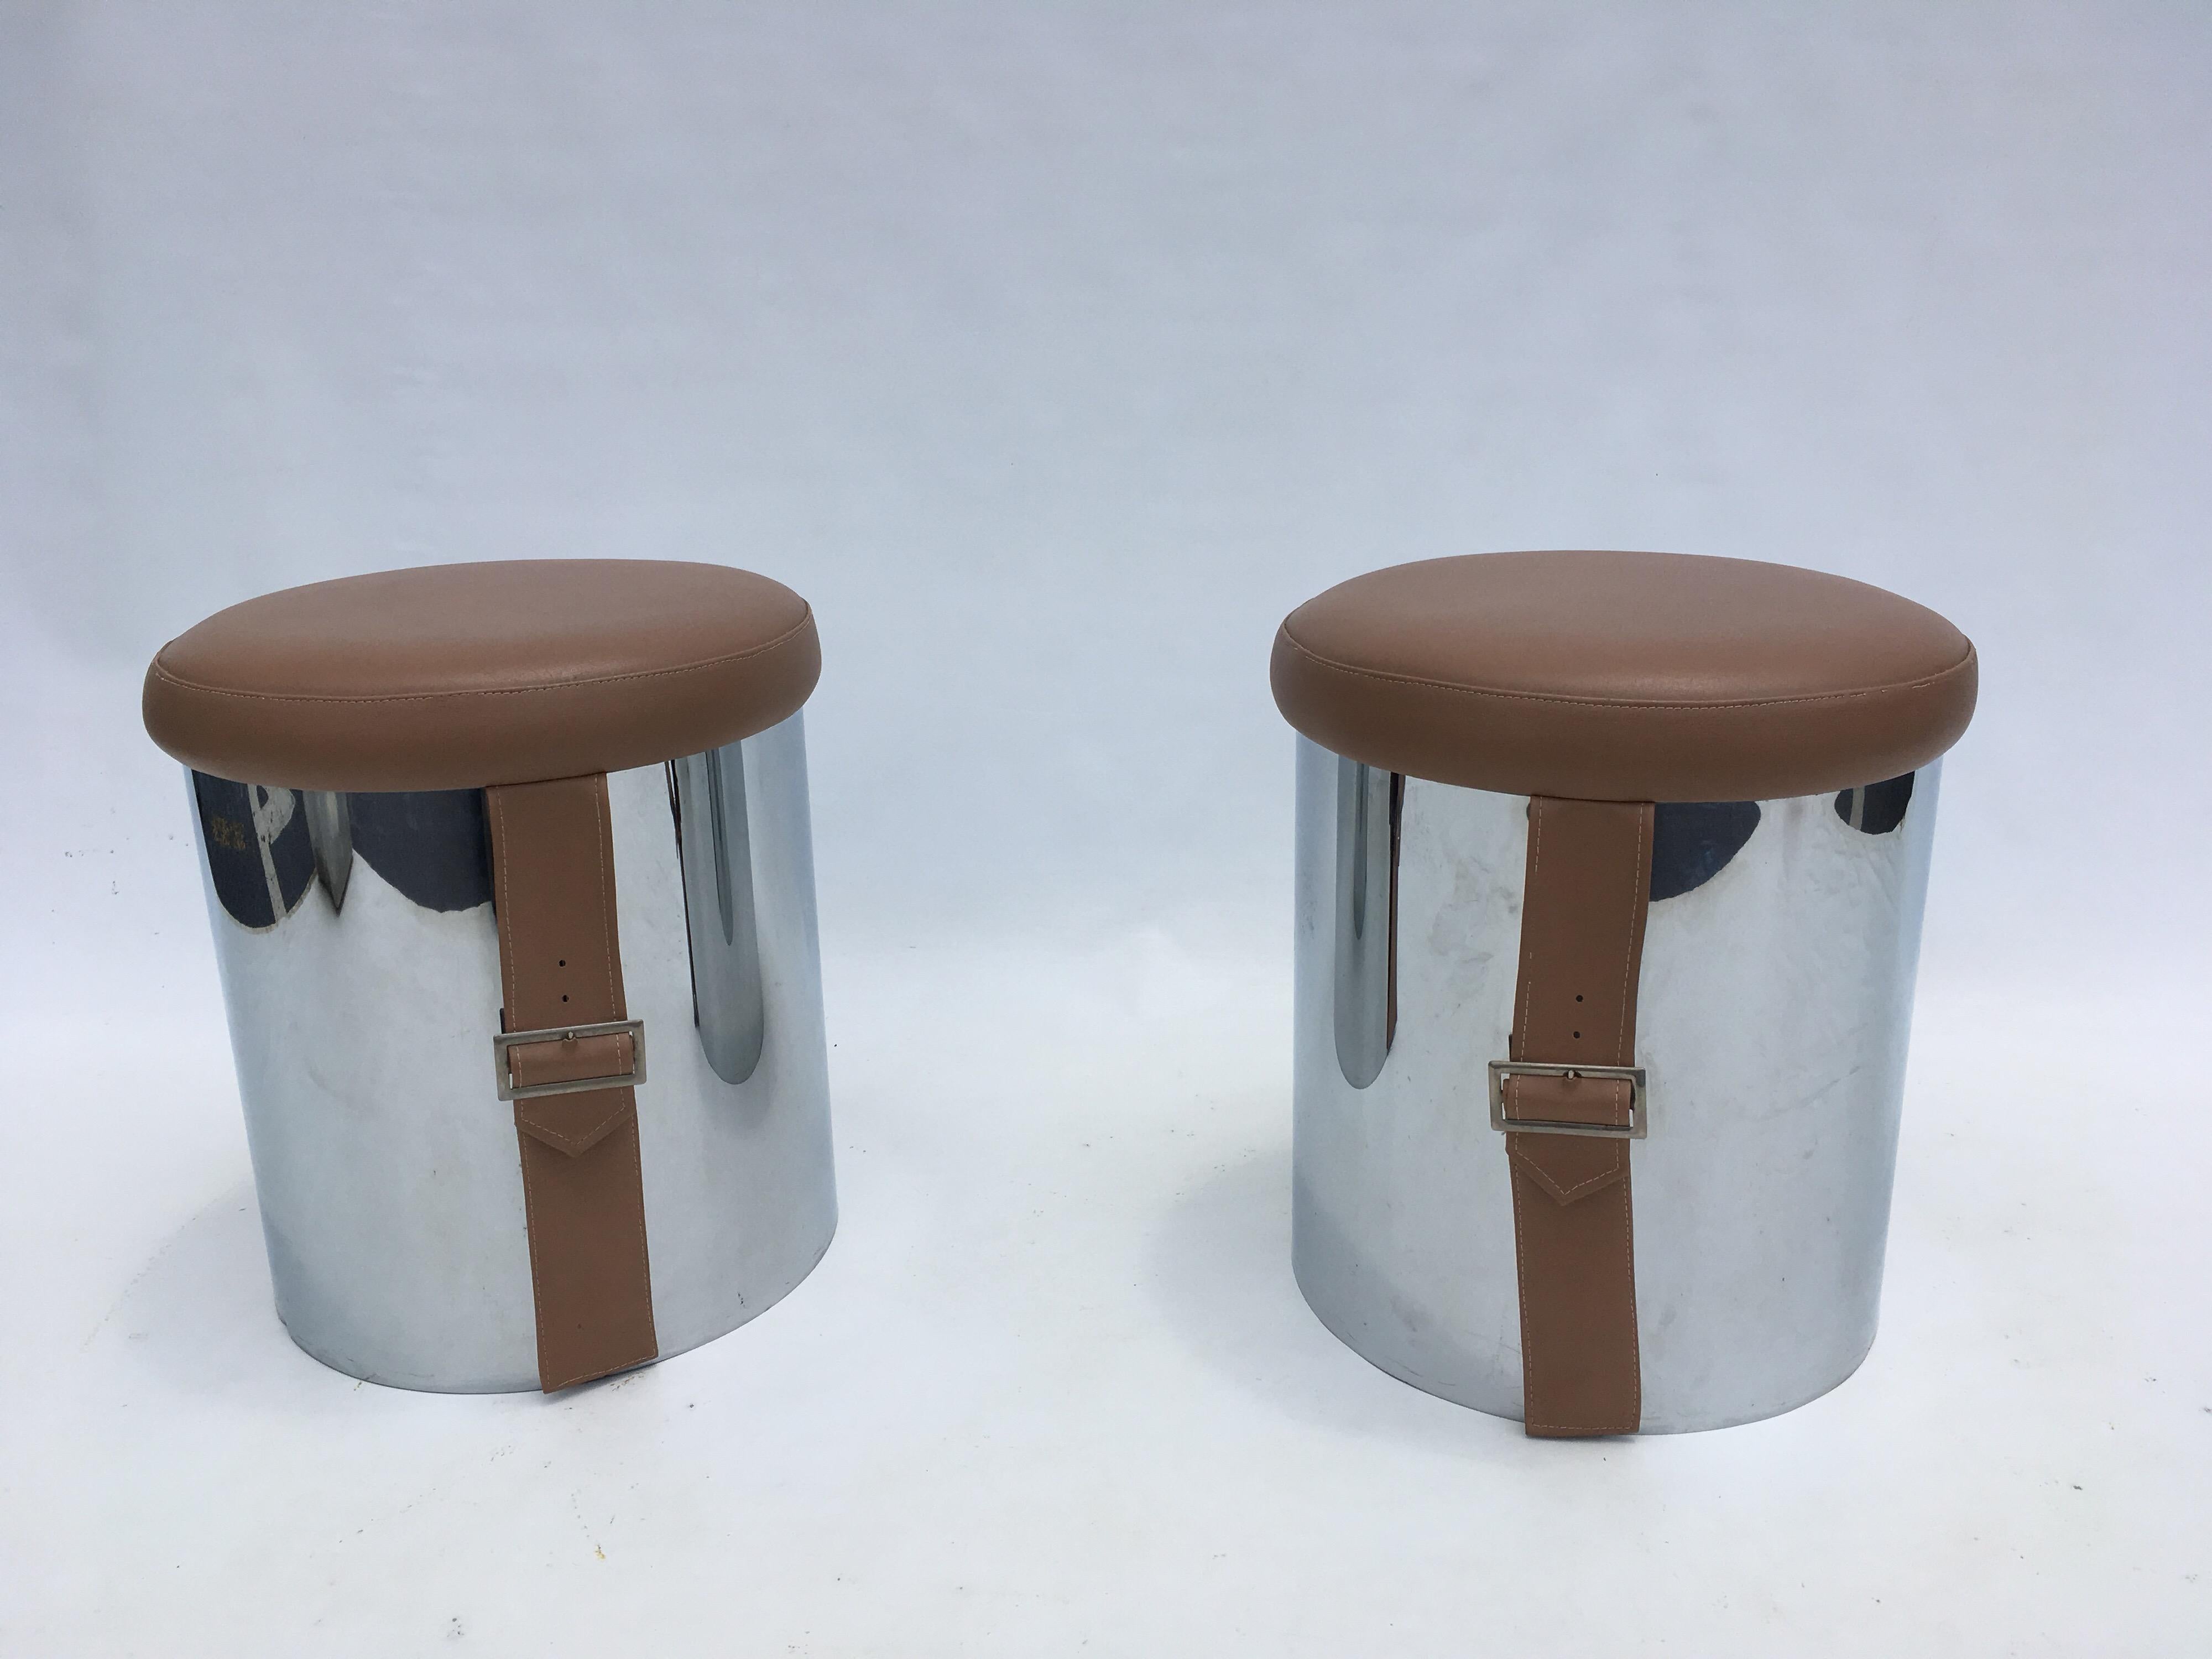 Chromed metal stools with vinyl seats.